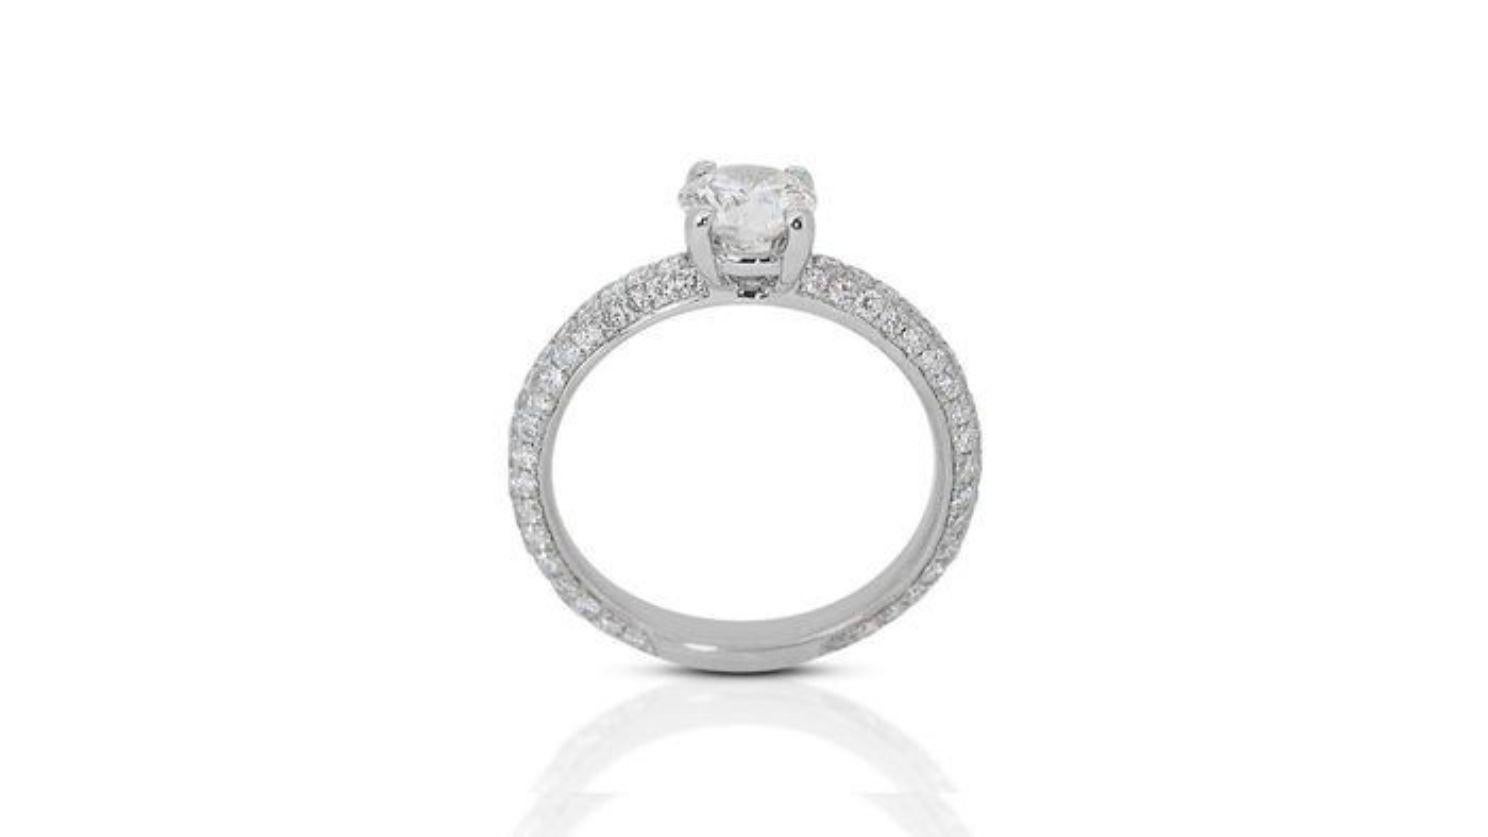 Sparkling 1.80ct Halo Pave Diamond Ring set in 18K White Gold In New Condition For Sale In רמת גן, IL